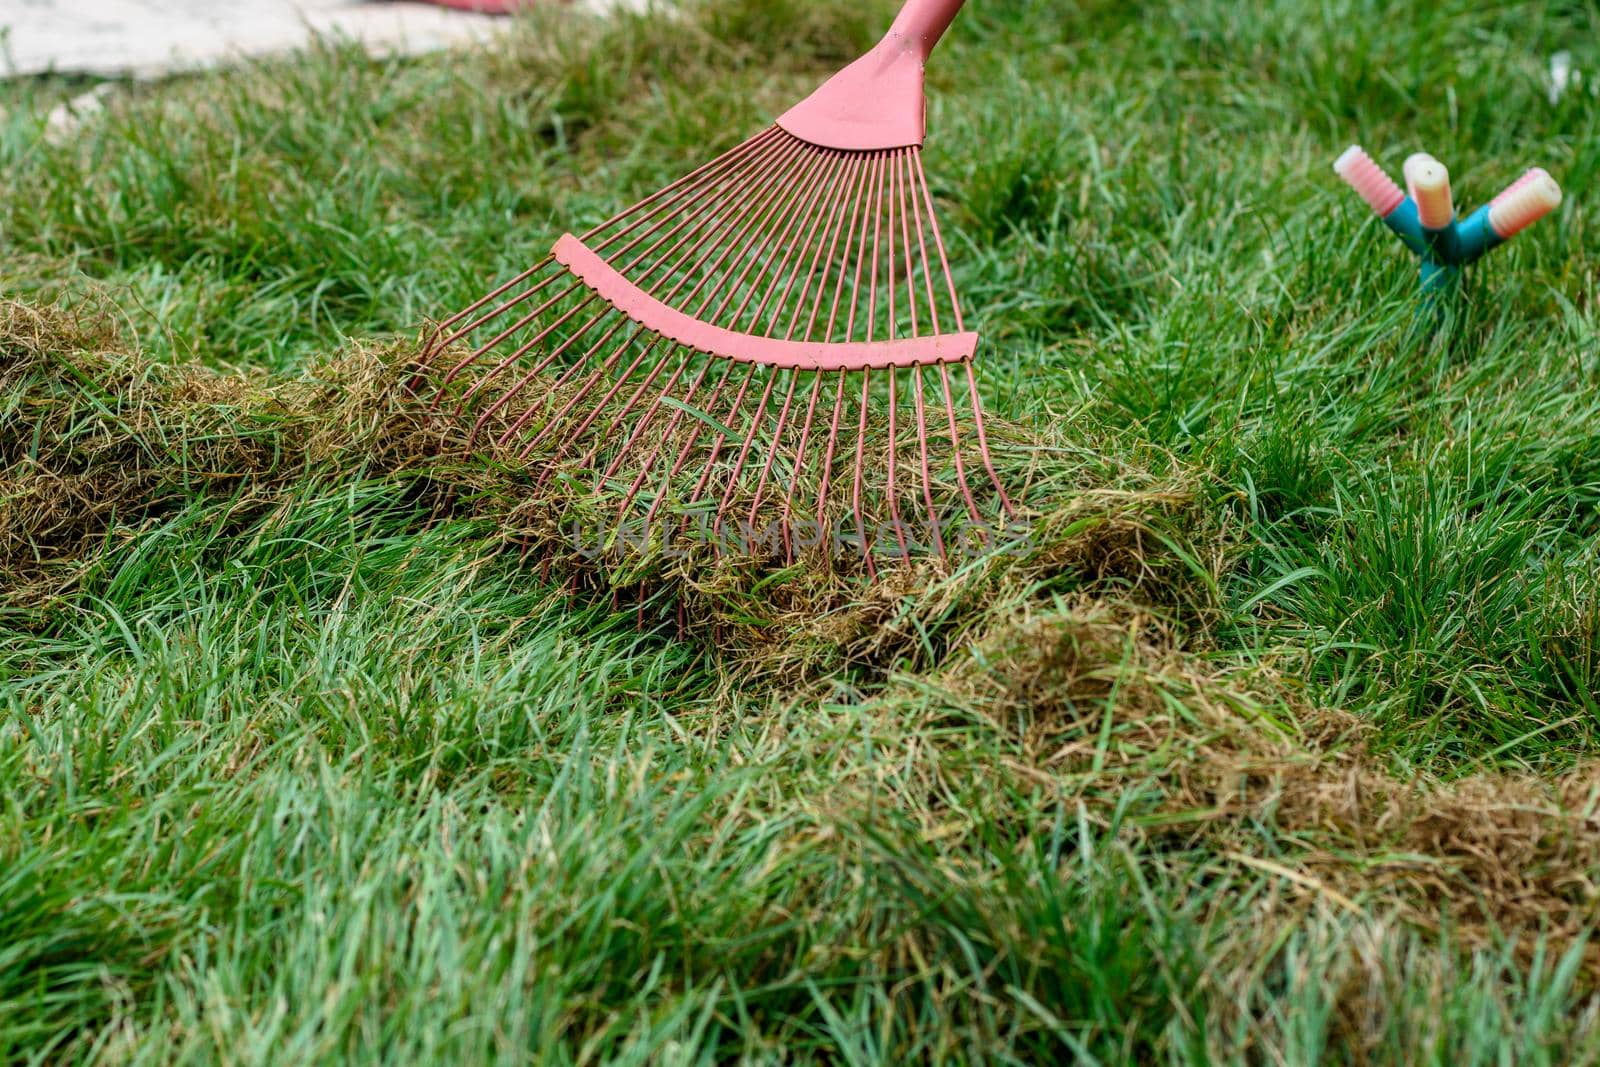 Cleaning cut grass with a fan rake